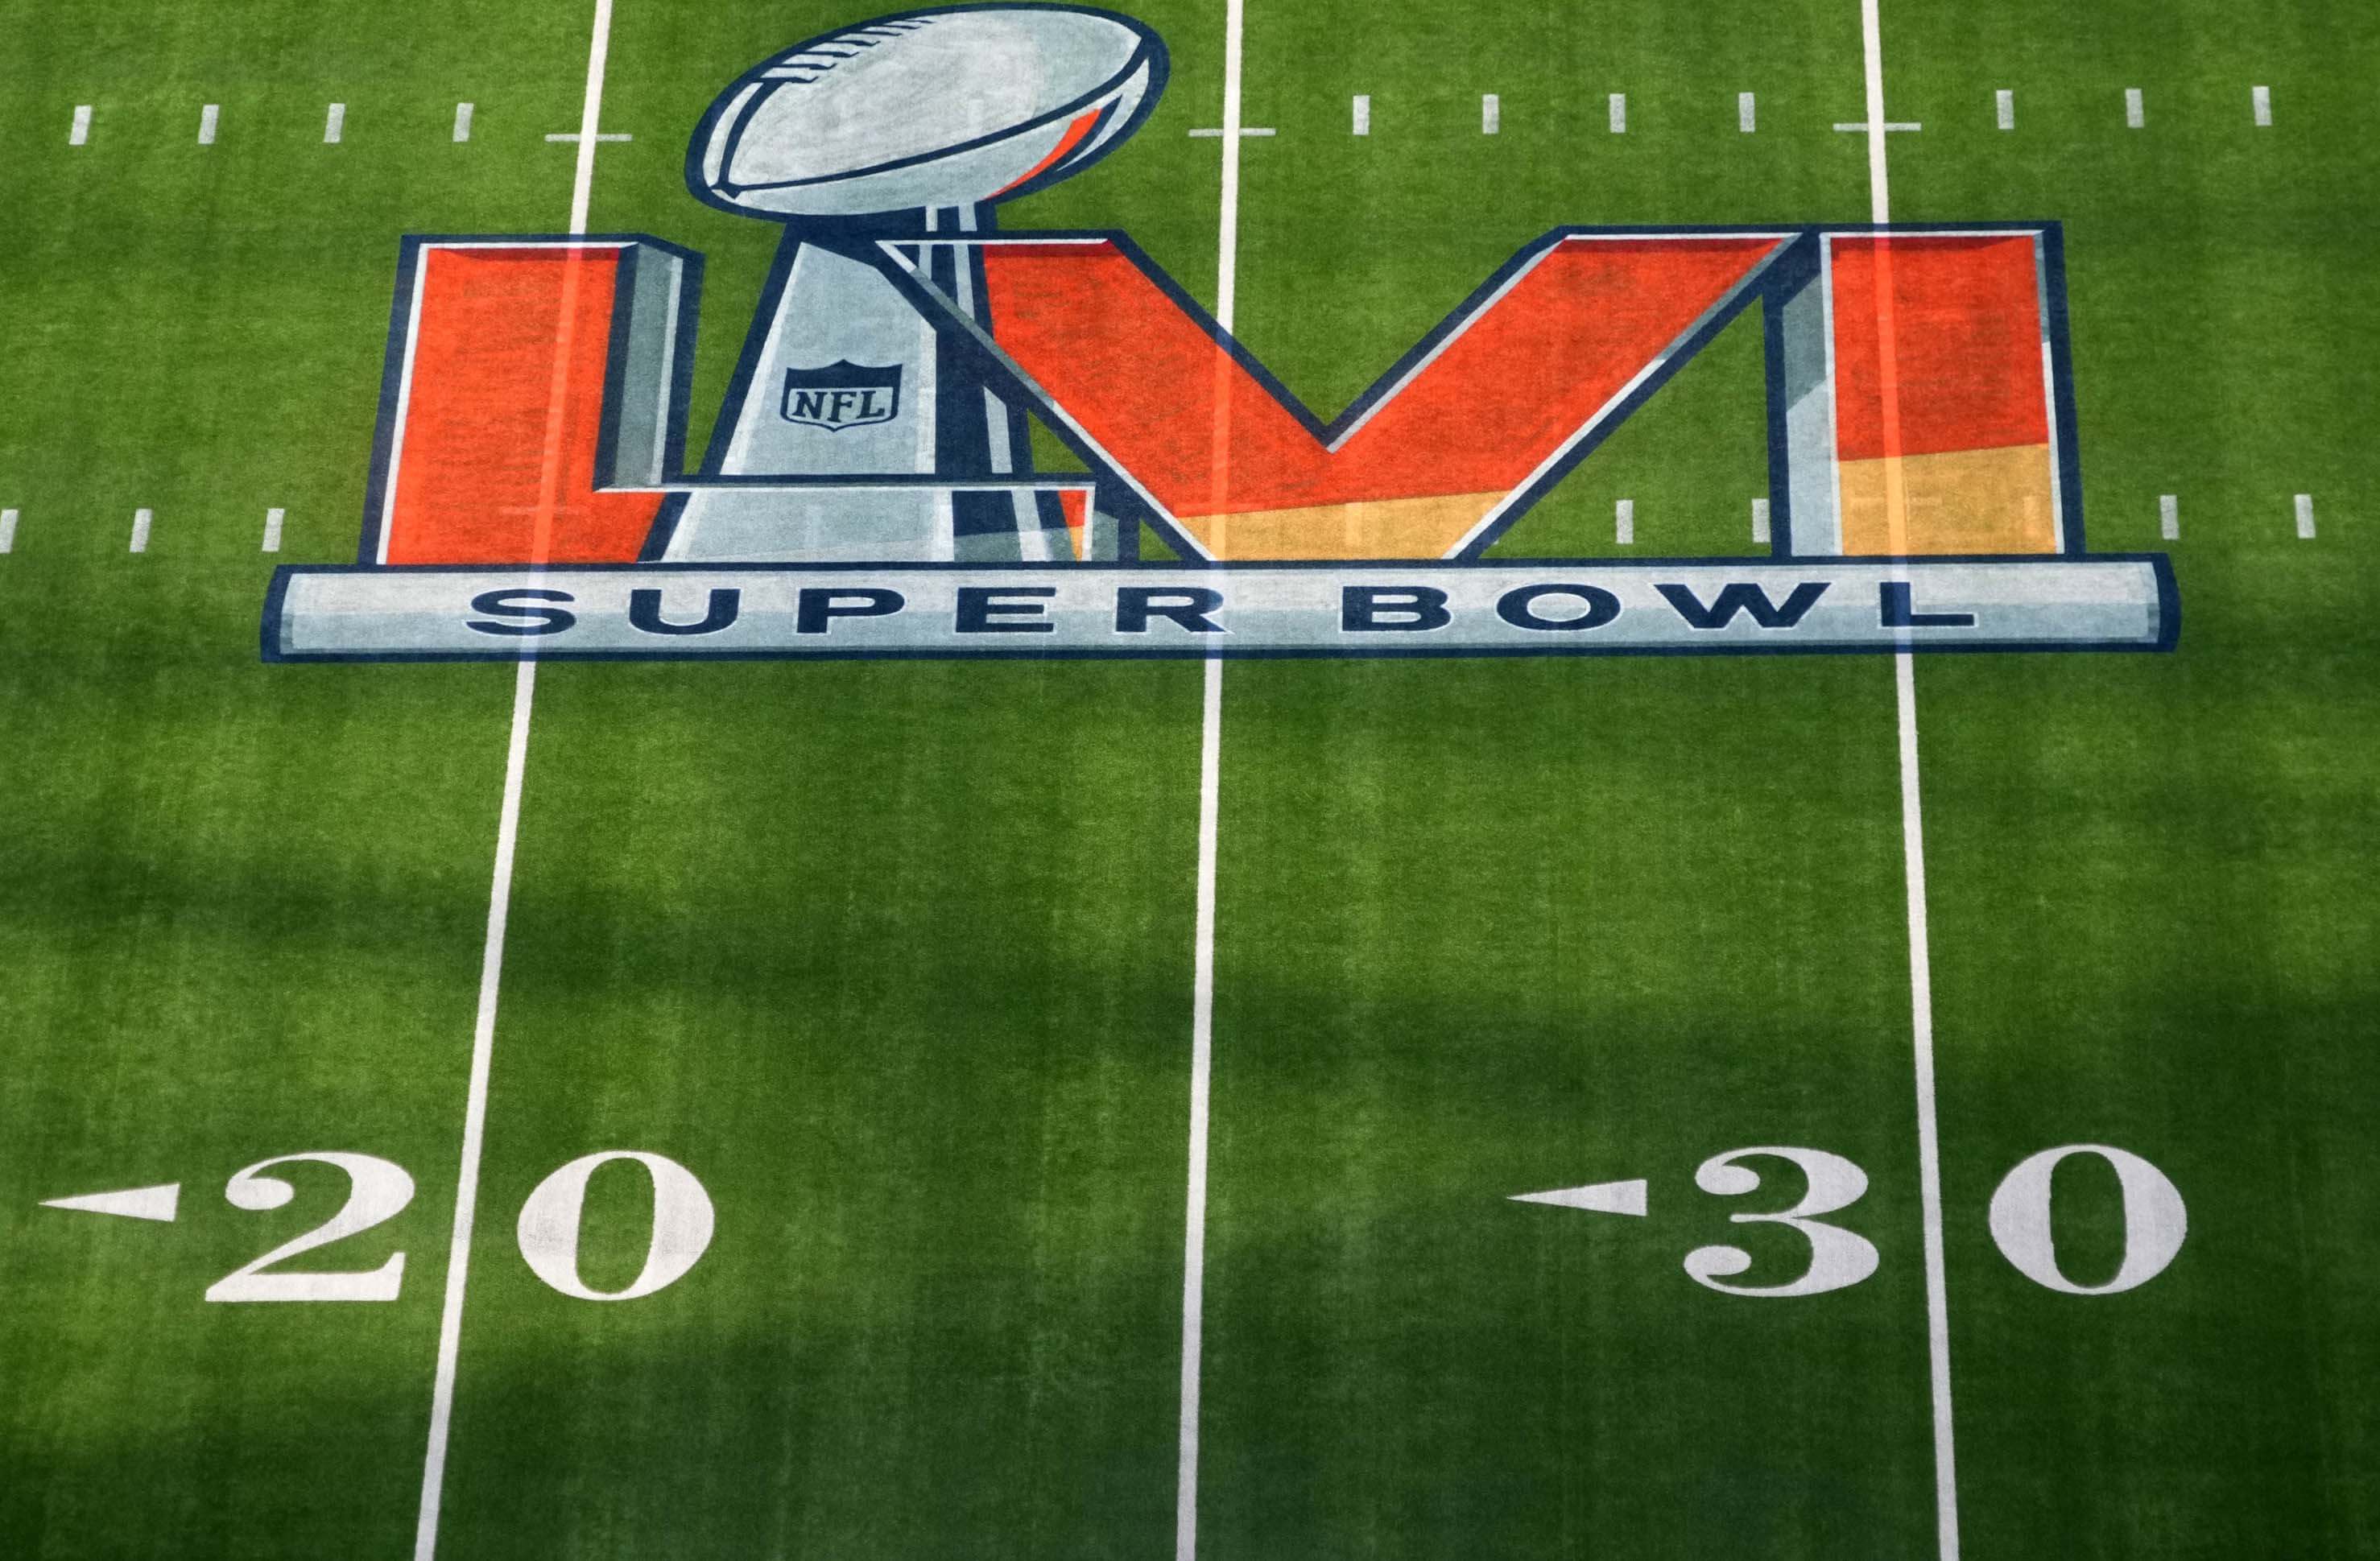 A detailed view of the Super Bowl LVI logo on the field at SoFi Stadium. Super Bowl 56 between the Los Angeles Rams and the Cincinnati Bengals will be played on Feb. 13, 2022.